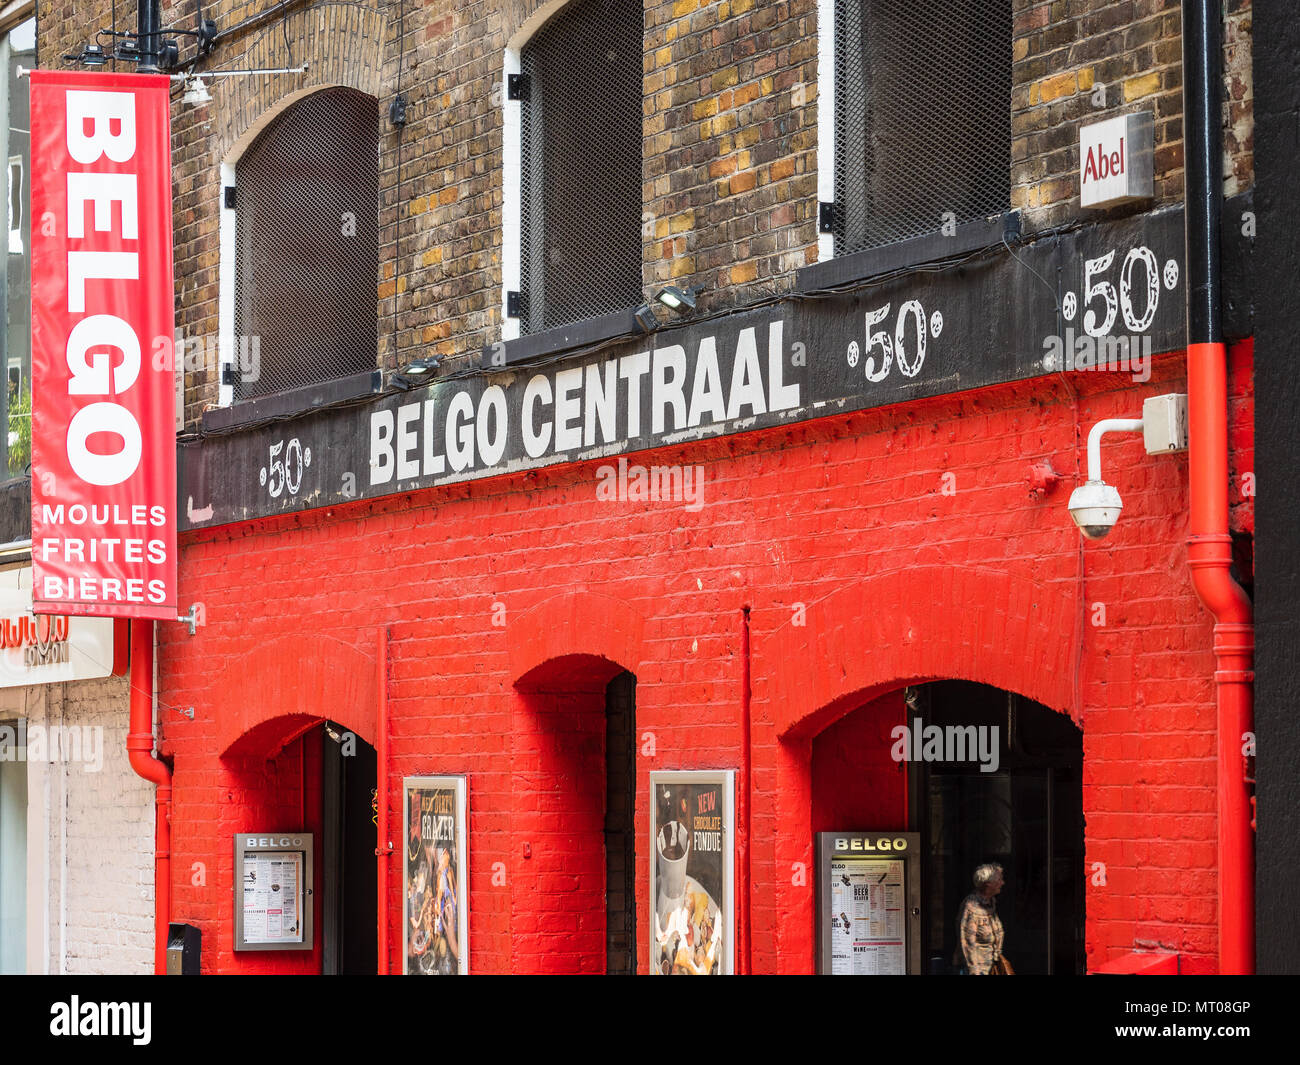 Belgo Centraal Restaurant in Covent Garden London - Belgo is a small chain of modern Belgian type restaurants specialising in moules, frites and beer. Stock Photo